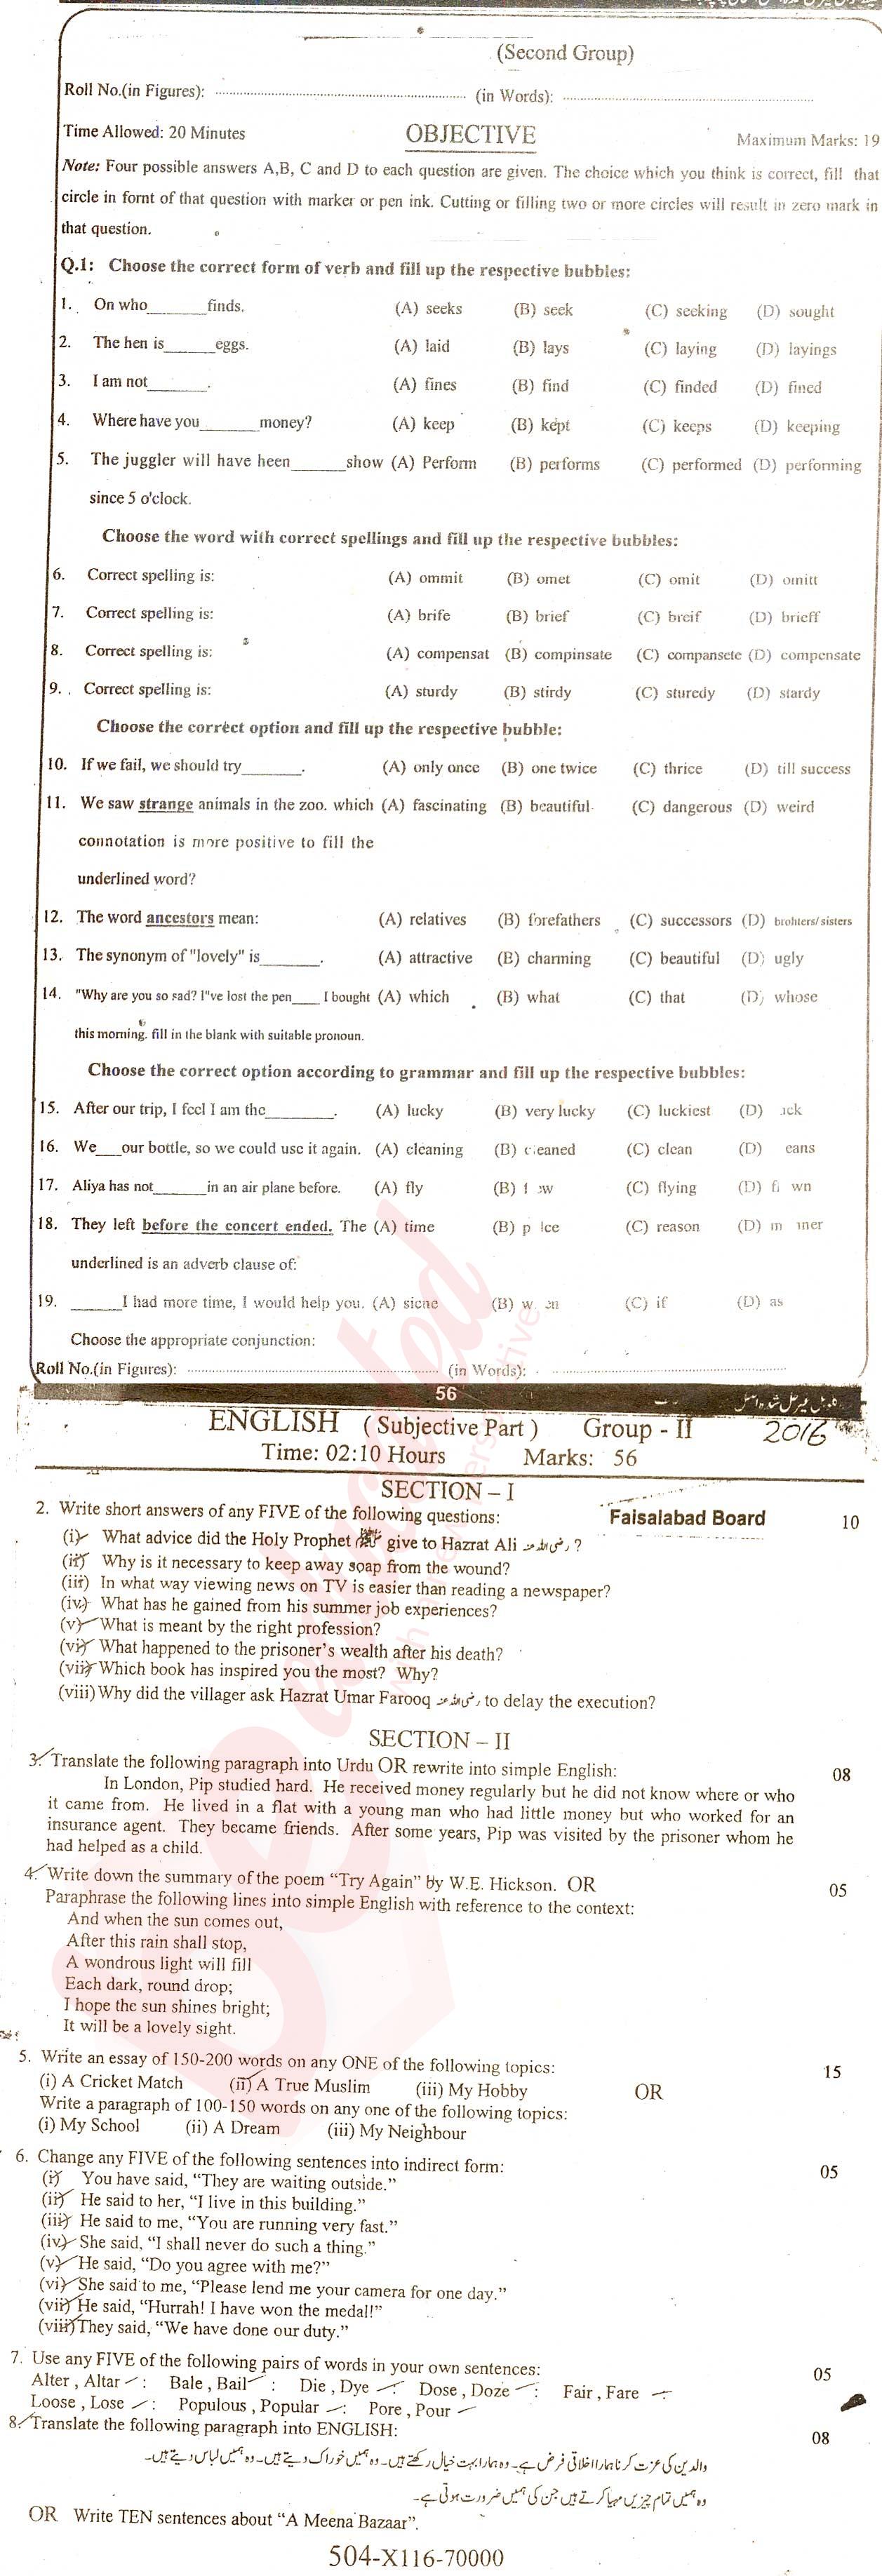 English 10th class Past Paper Group 2 BISE Faisalabad 2016